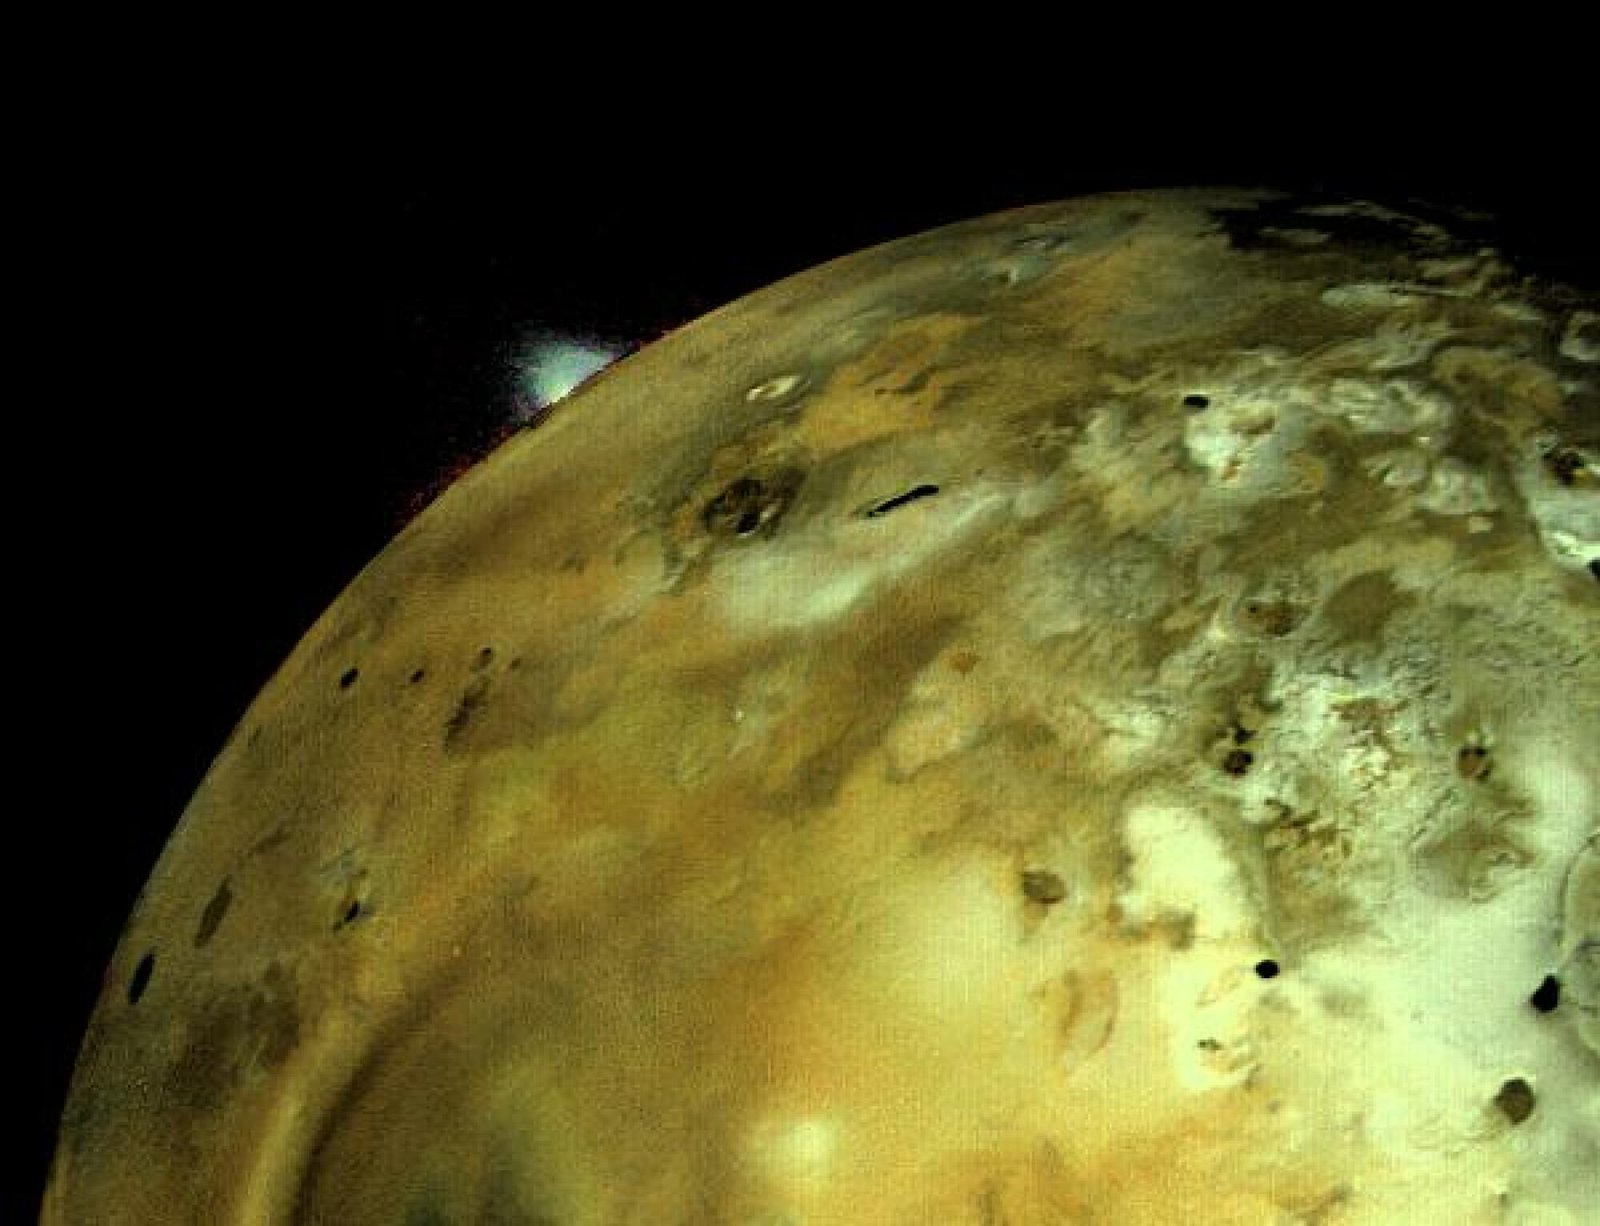 Voyager 1 captured this image of Io on March 4, 1979. A volcano is seen erupting on the moon